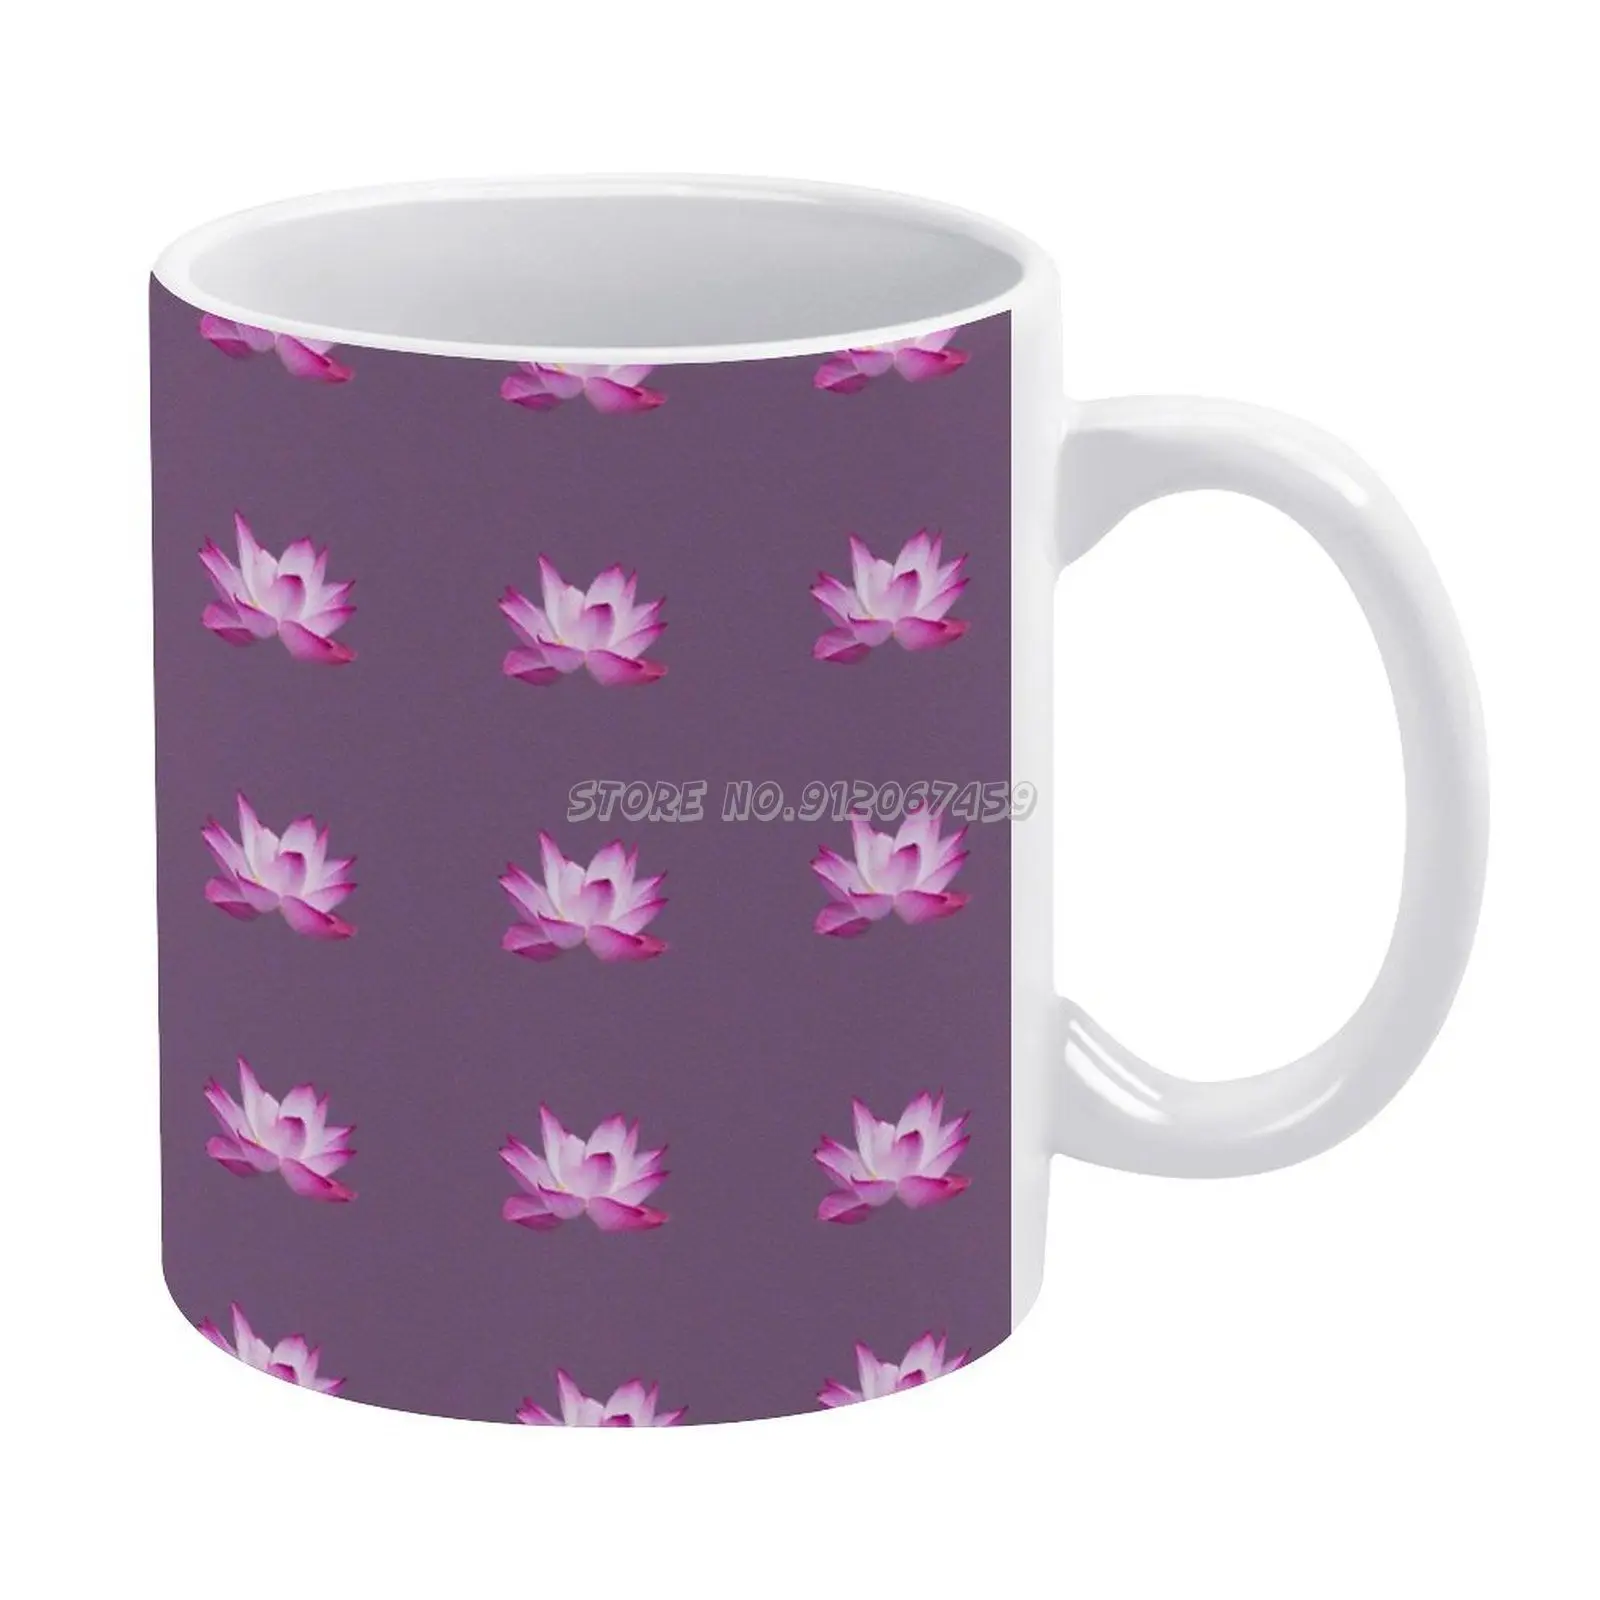 

Lotus Purple Coffee Mugs Cover Printed Home Soft Childhood Pillowcase Bedroom Home Decor Nice Gift Holidays Mothers Zen Pretty A